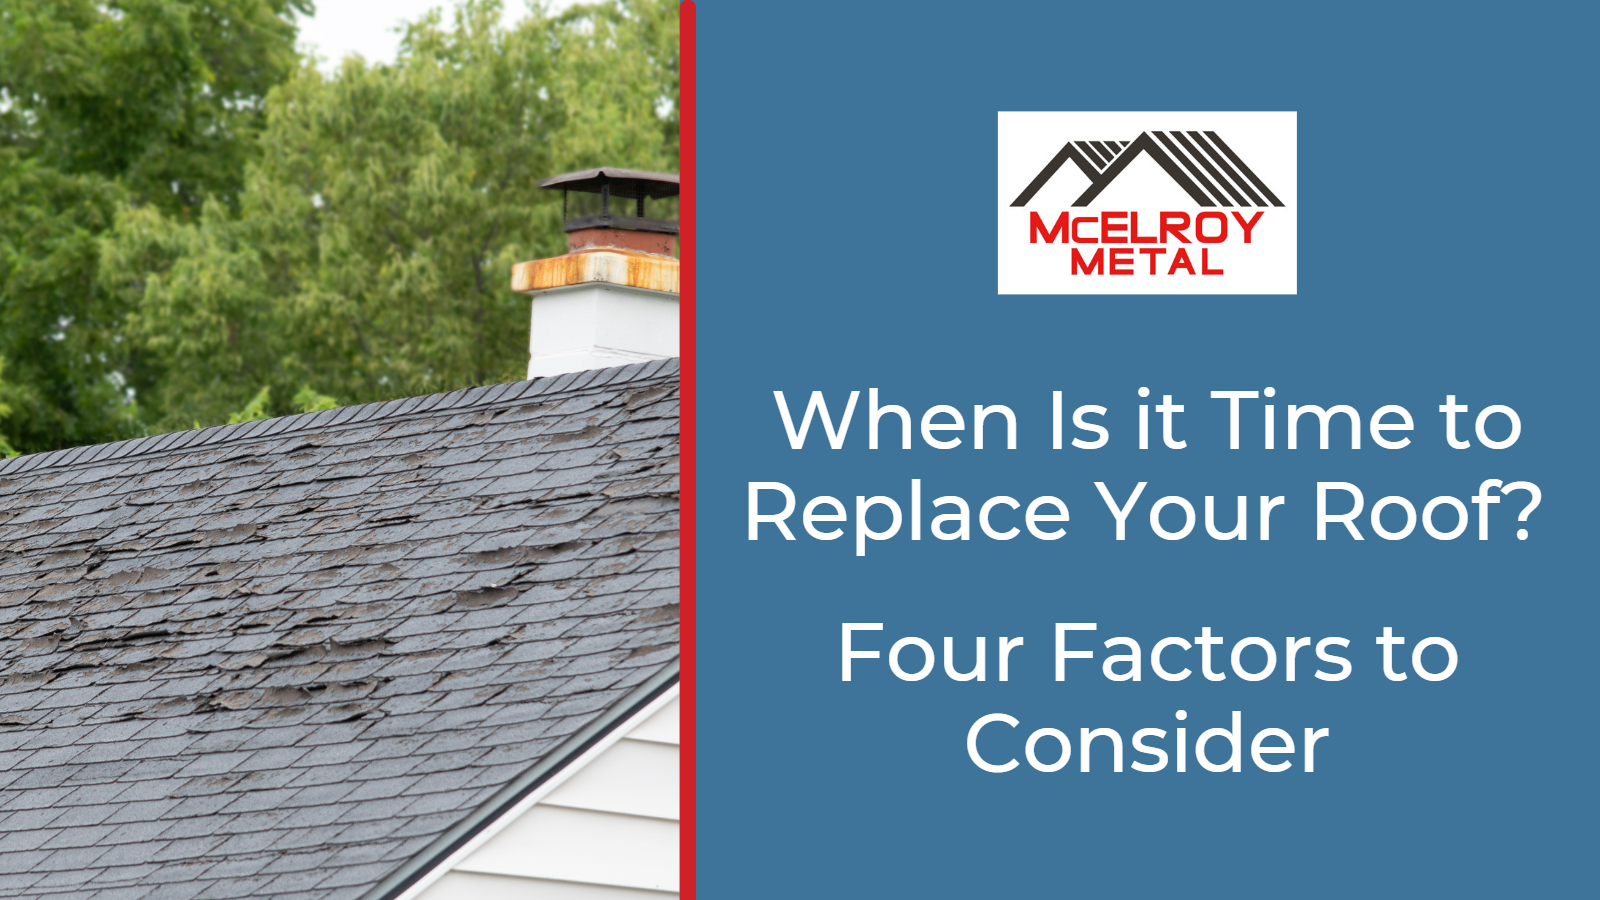 When Is it Time to Replace Your Roof? Four Factors to Consider